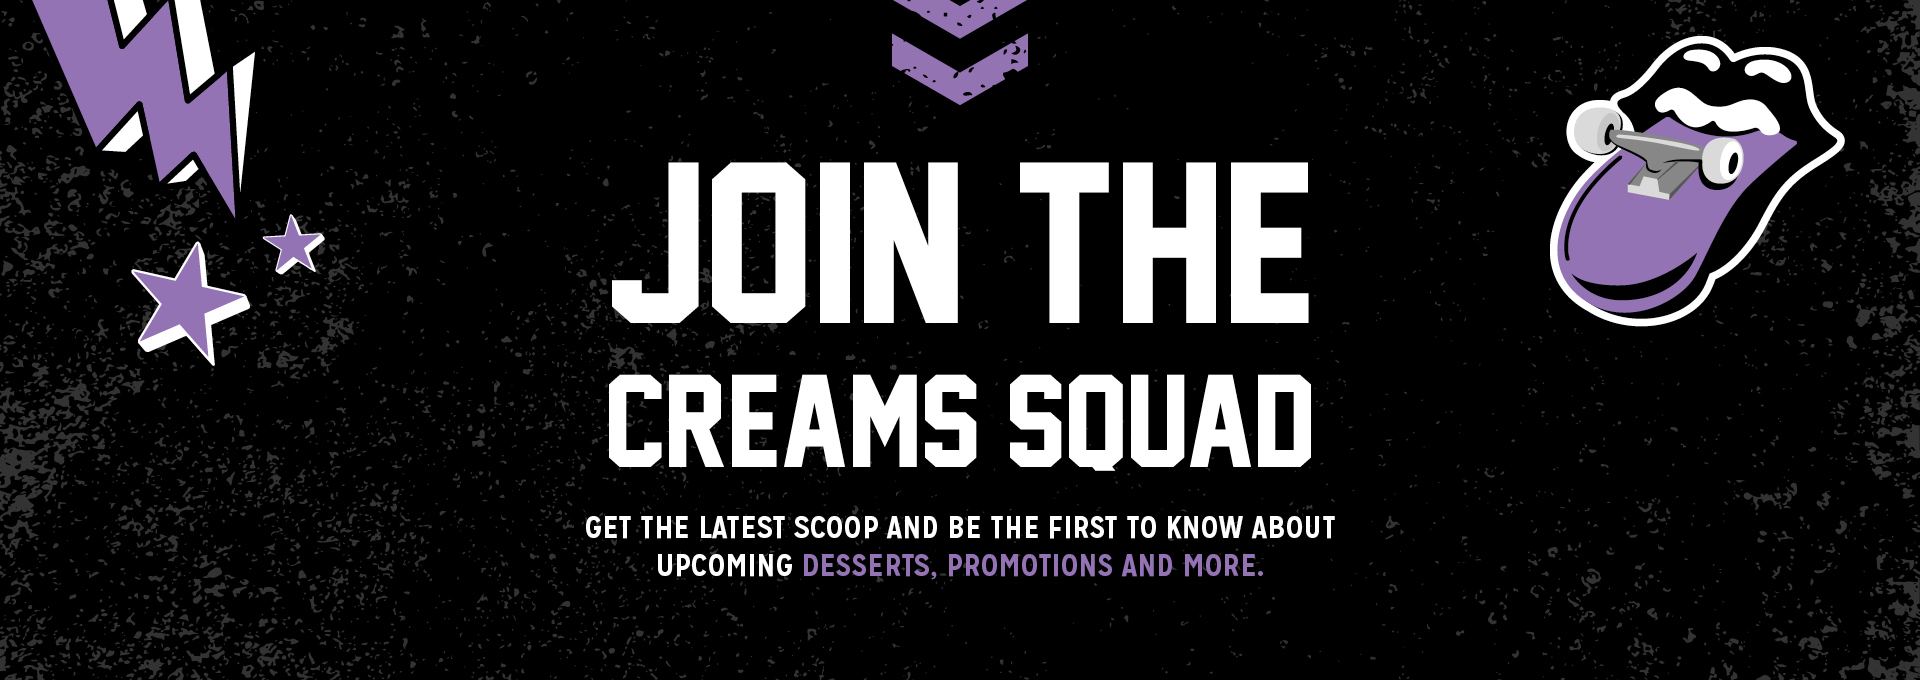 Join the Creams Squad_1920x680